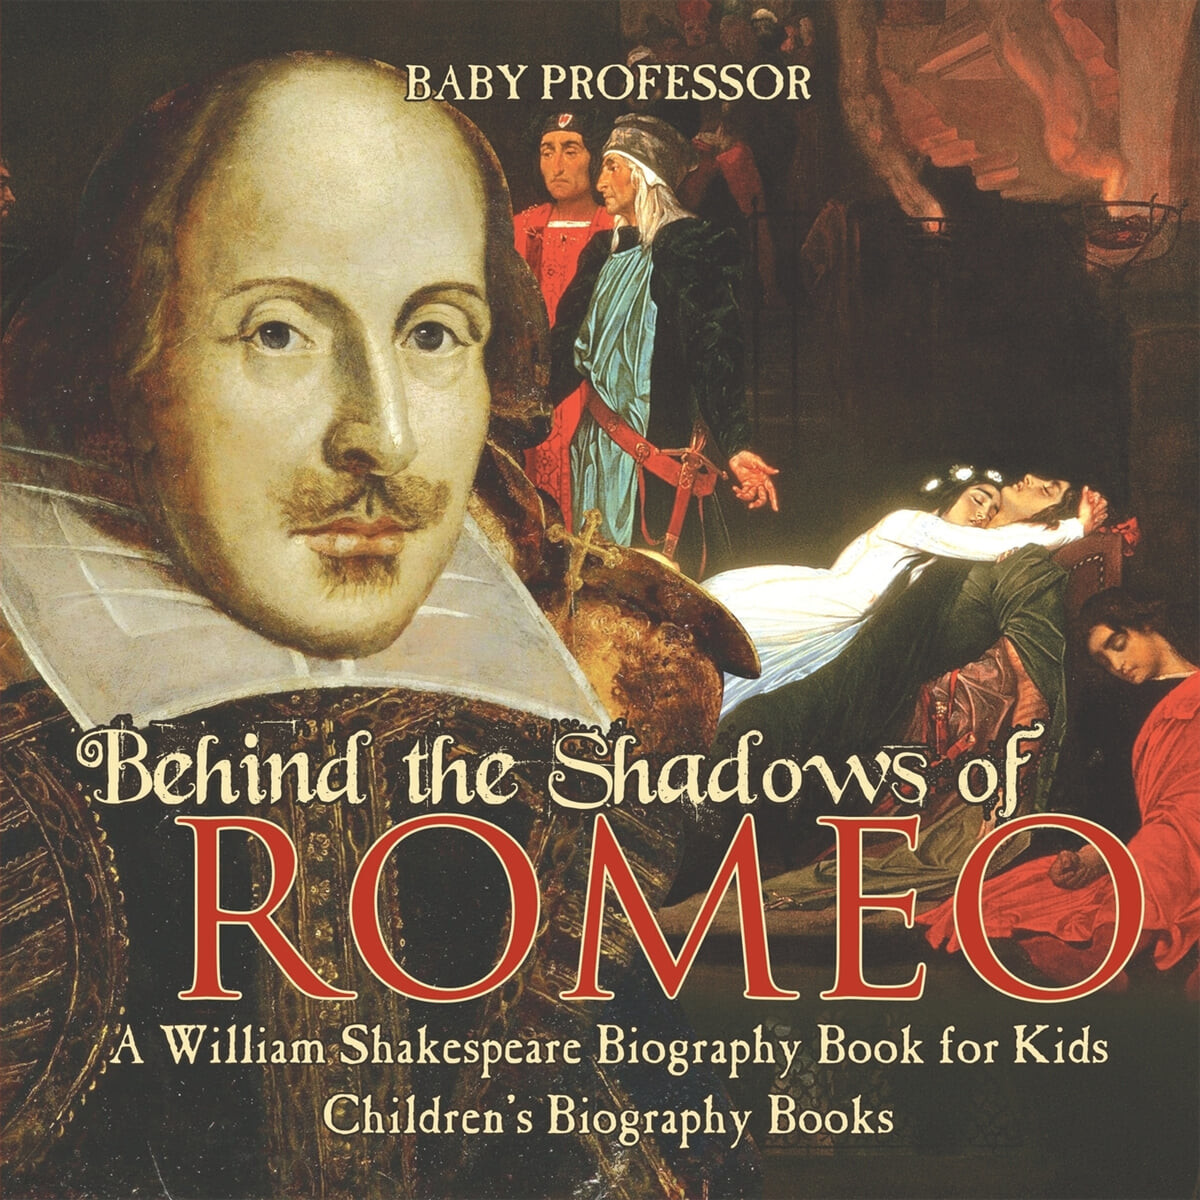 Behind the Shadows of Romeo: A William Shakespeare Biography Book for Kids - Children’s Biography Books